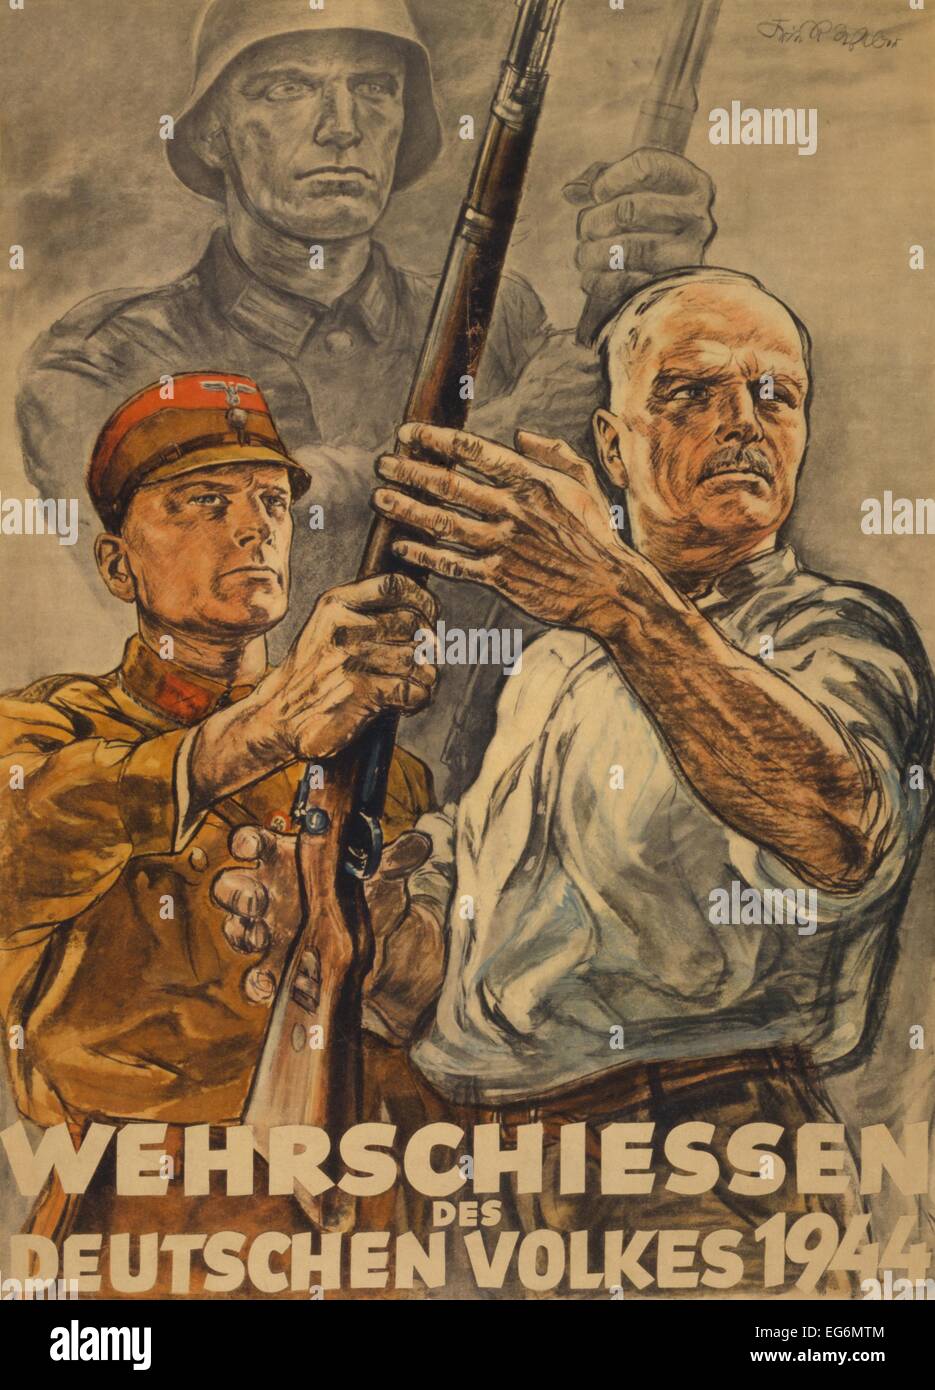 'Defense Shooting for the German People.' World War 2 poster for a civilian defense shooting contest. It depicts a soldier Stock Photo